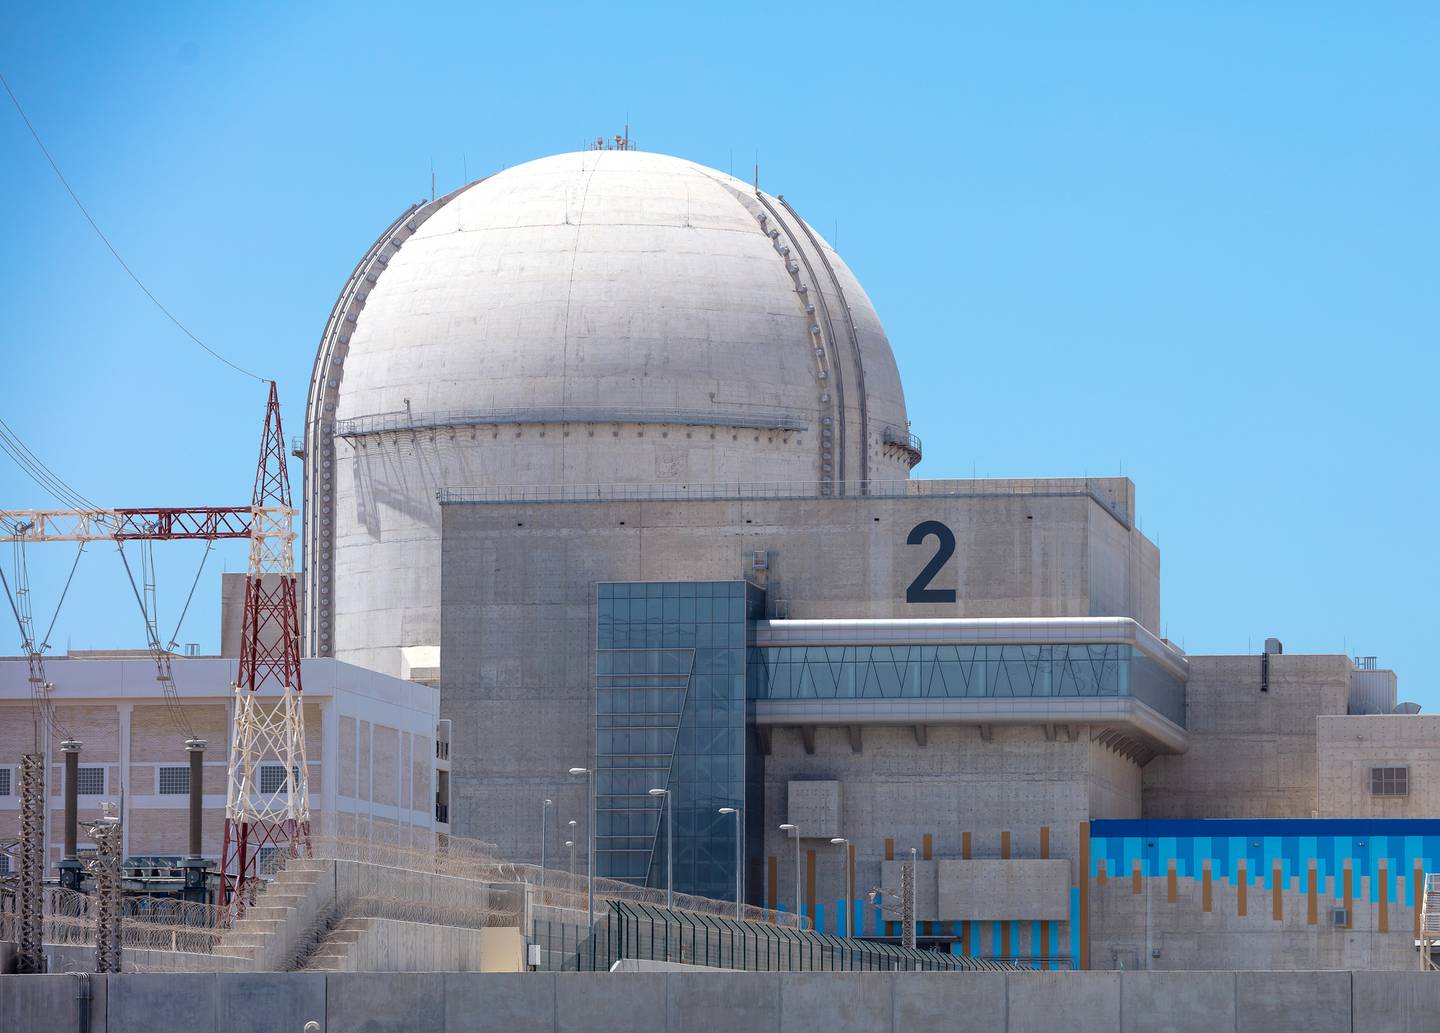 Barakah unit 2. The UAE's nuclear power plant has started up its second unit, just four months after commercial operations began using the first reactor.